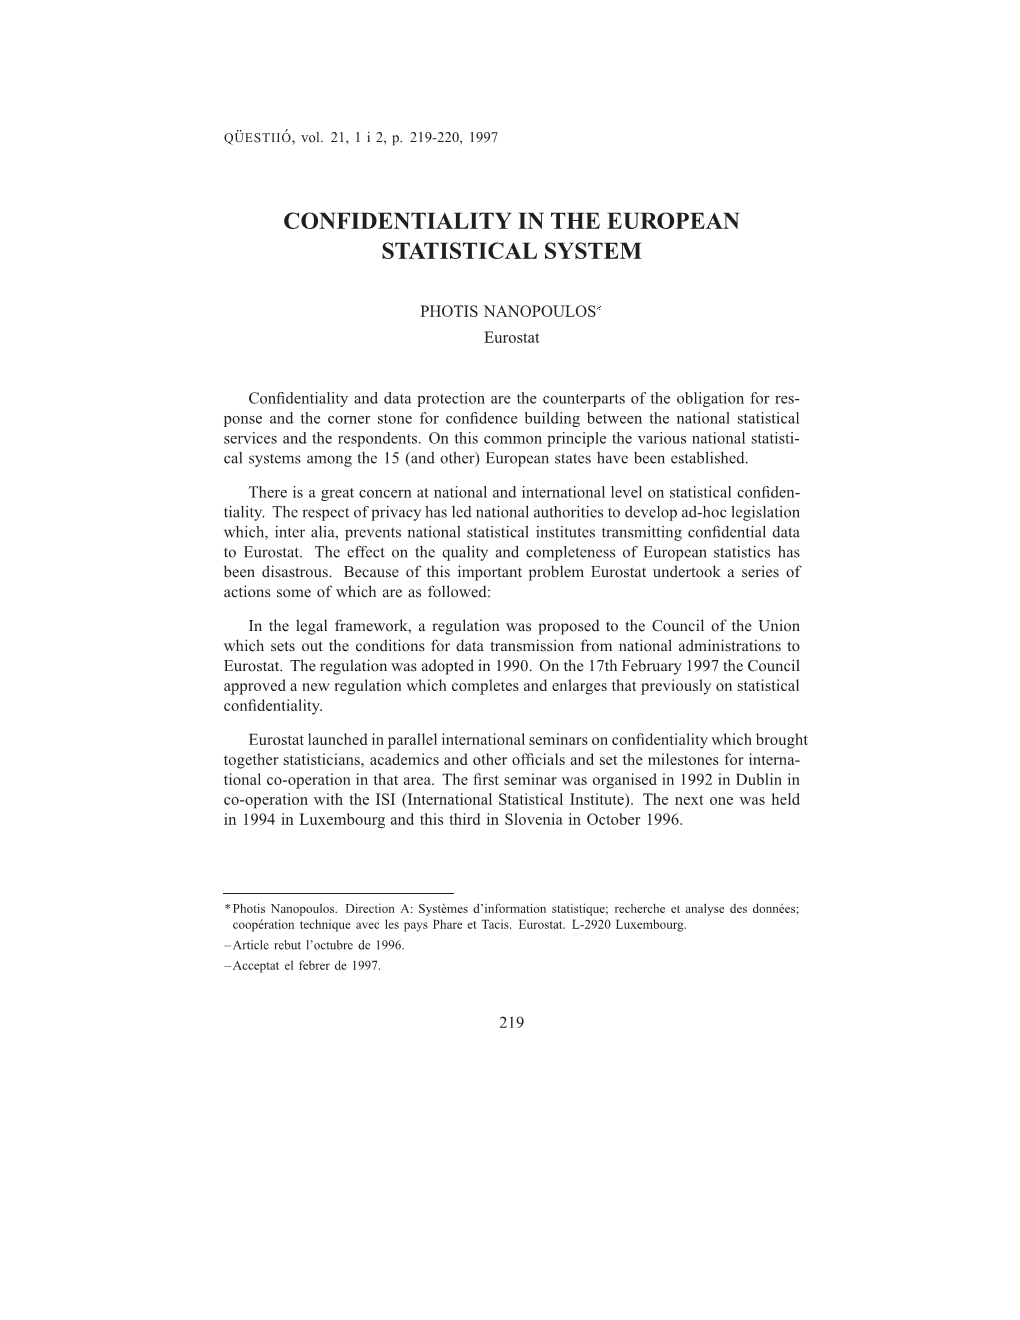 Confidentiality in the European Statistical System